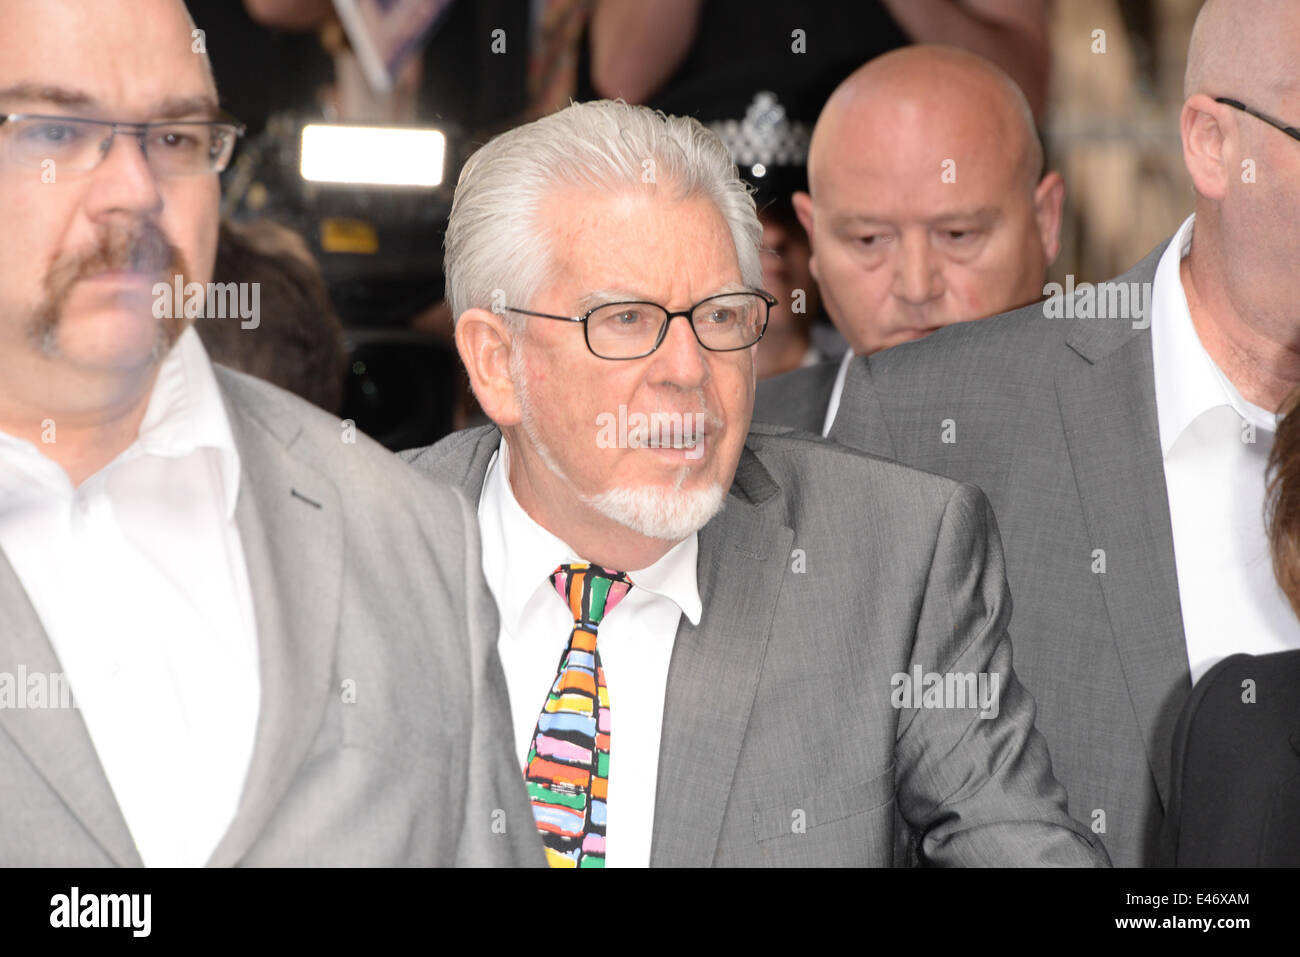 London, UK. 4th July, 2014. Rolf Harris arrives at court for sentencing on 12 counts of indecent assault. Credit:  See Li/Alamy Live News Stock Photo